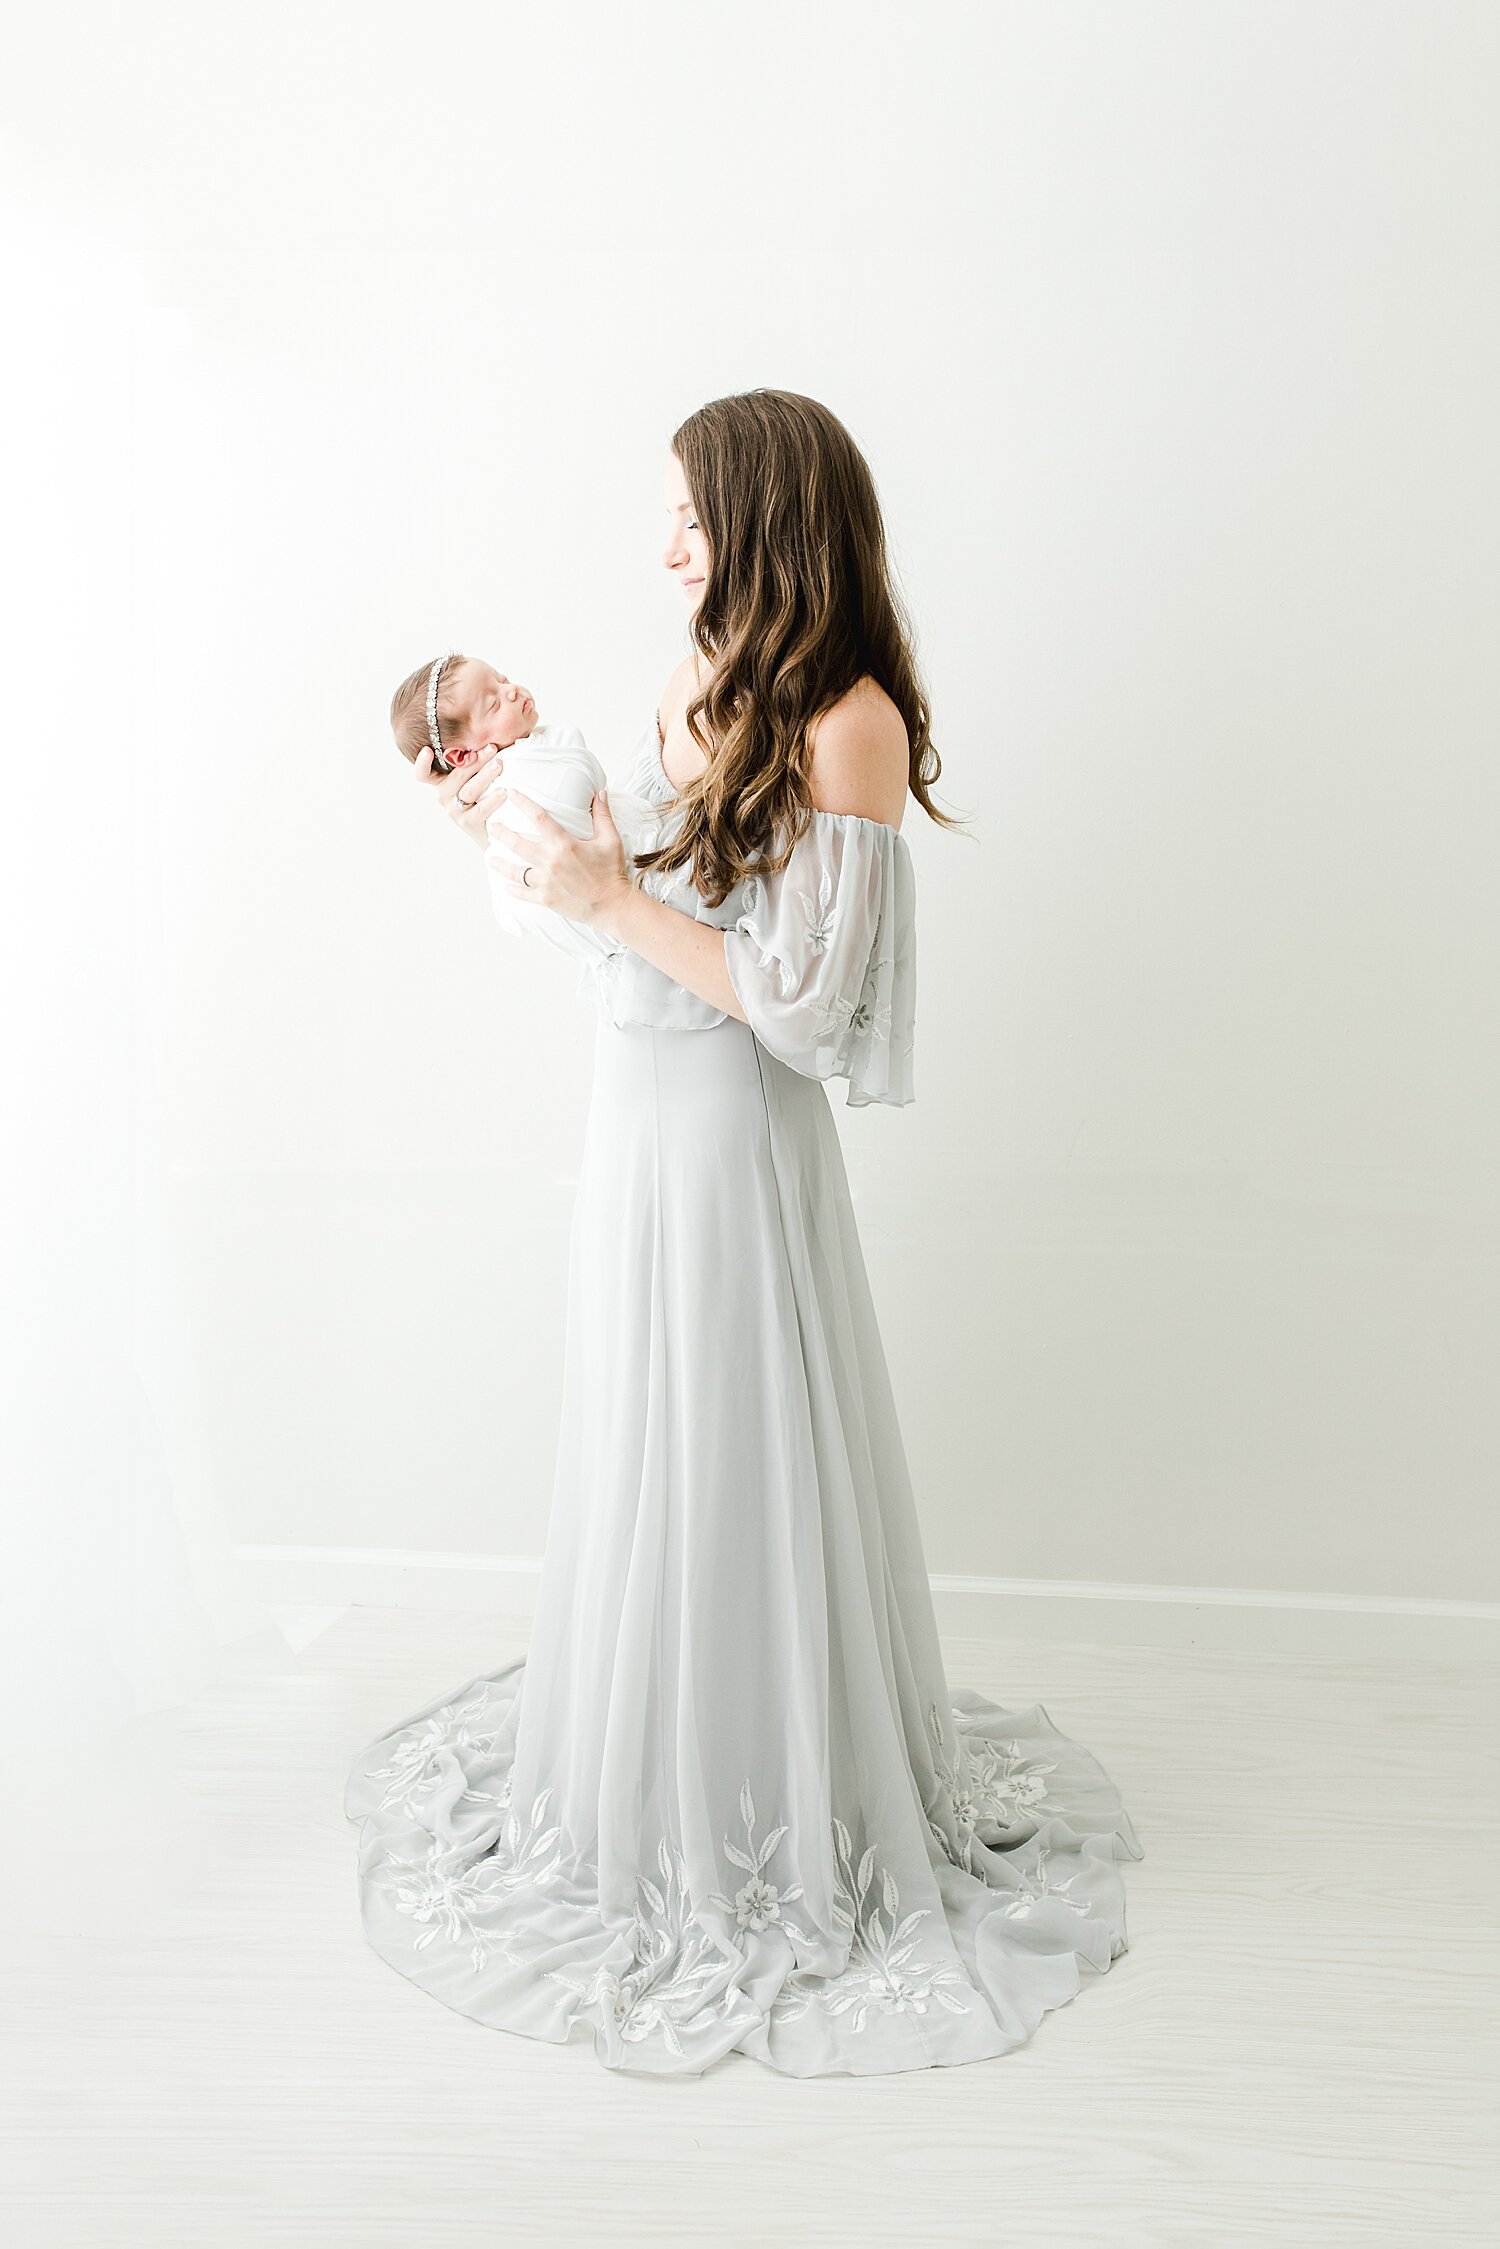 Mom in gorgeous dresses for newborn session with daughter. Photos by Kristin Wood Photography.